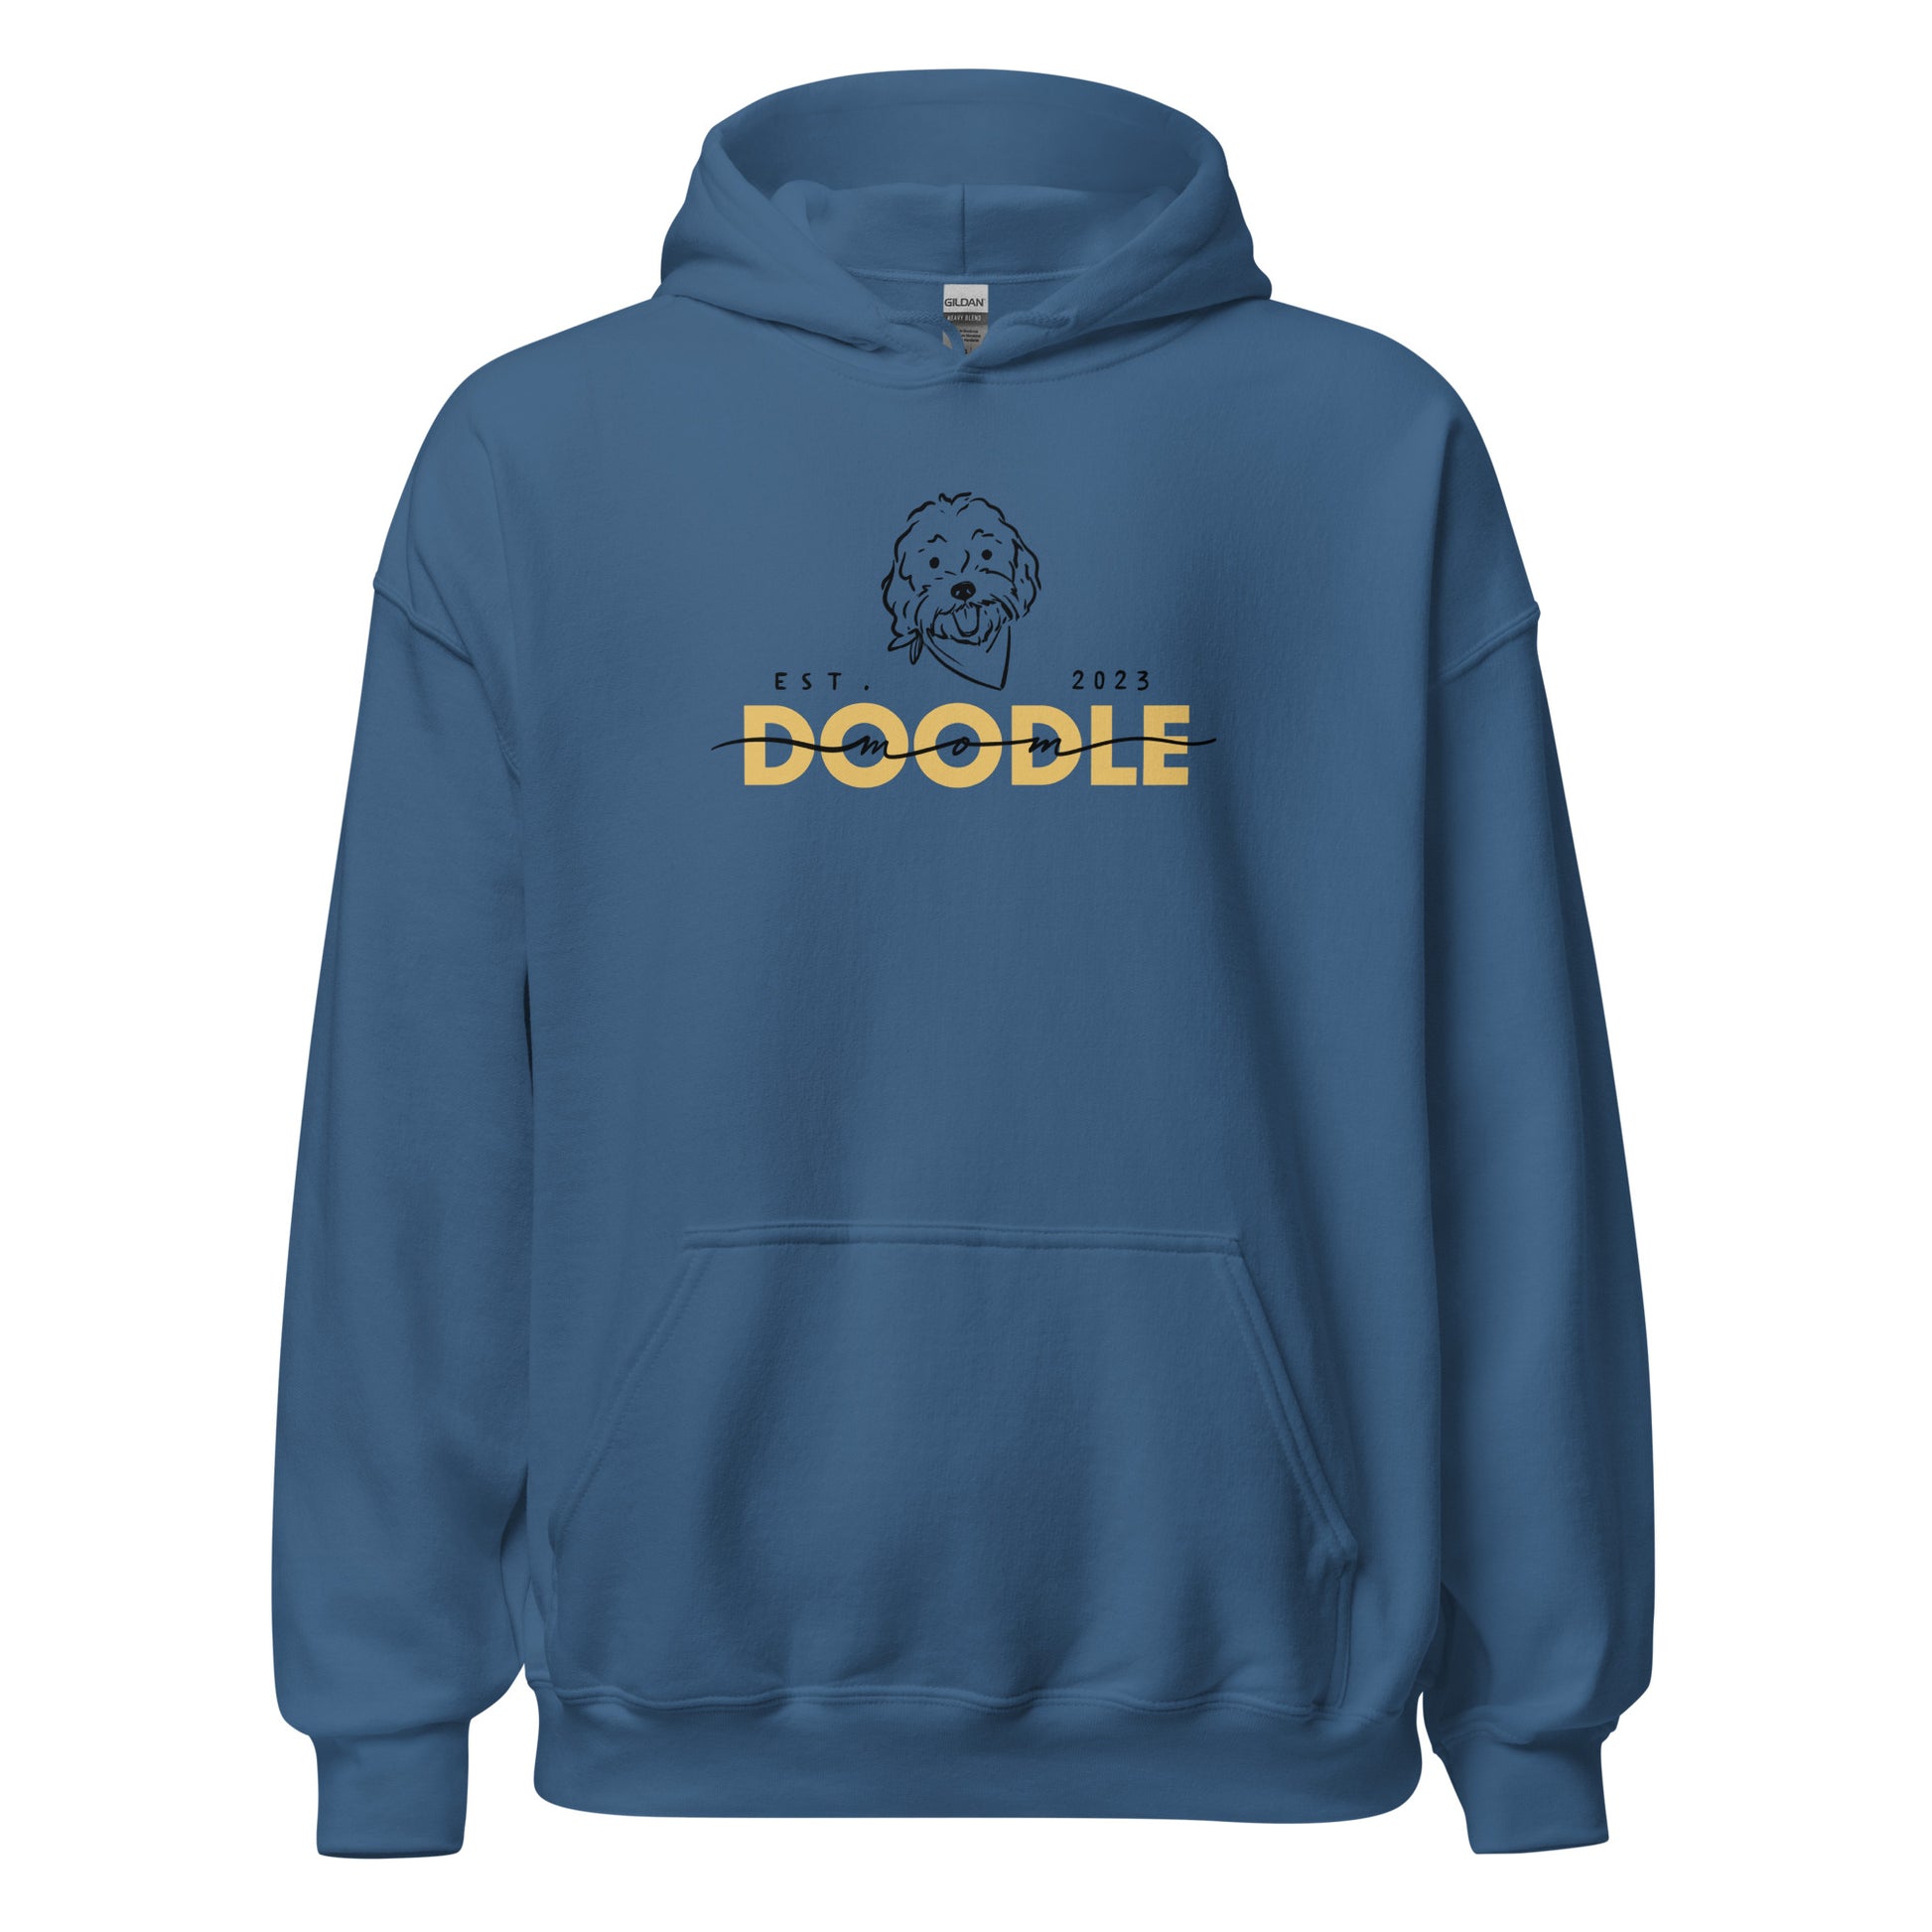 Goldendoodle Mom Hoodie with Goldendoodle face and words "Doodle Mom Est 2023" in indigo blue color